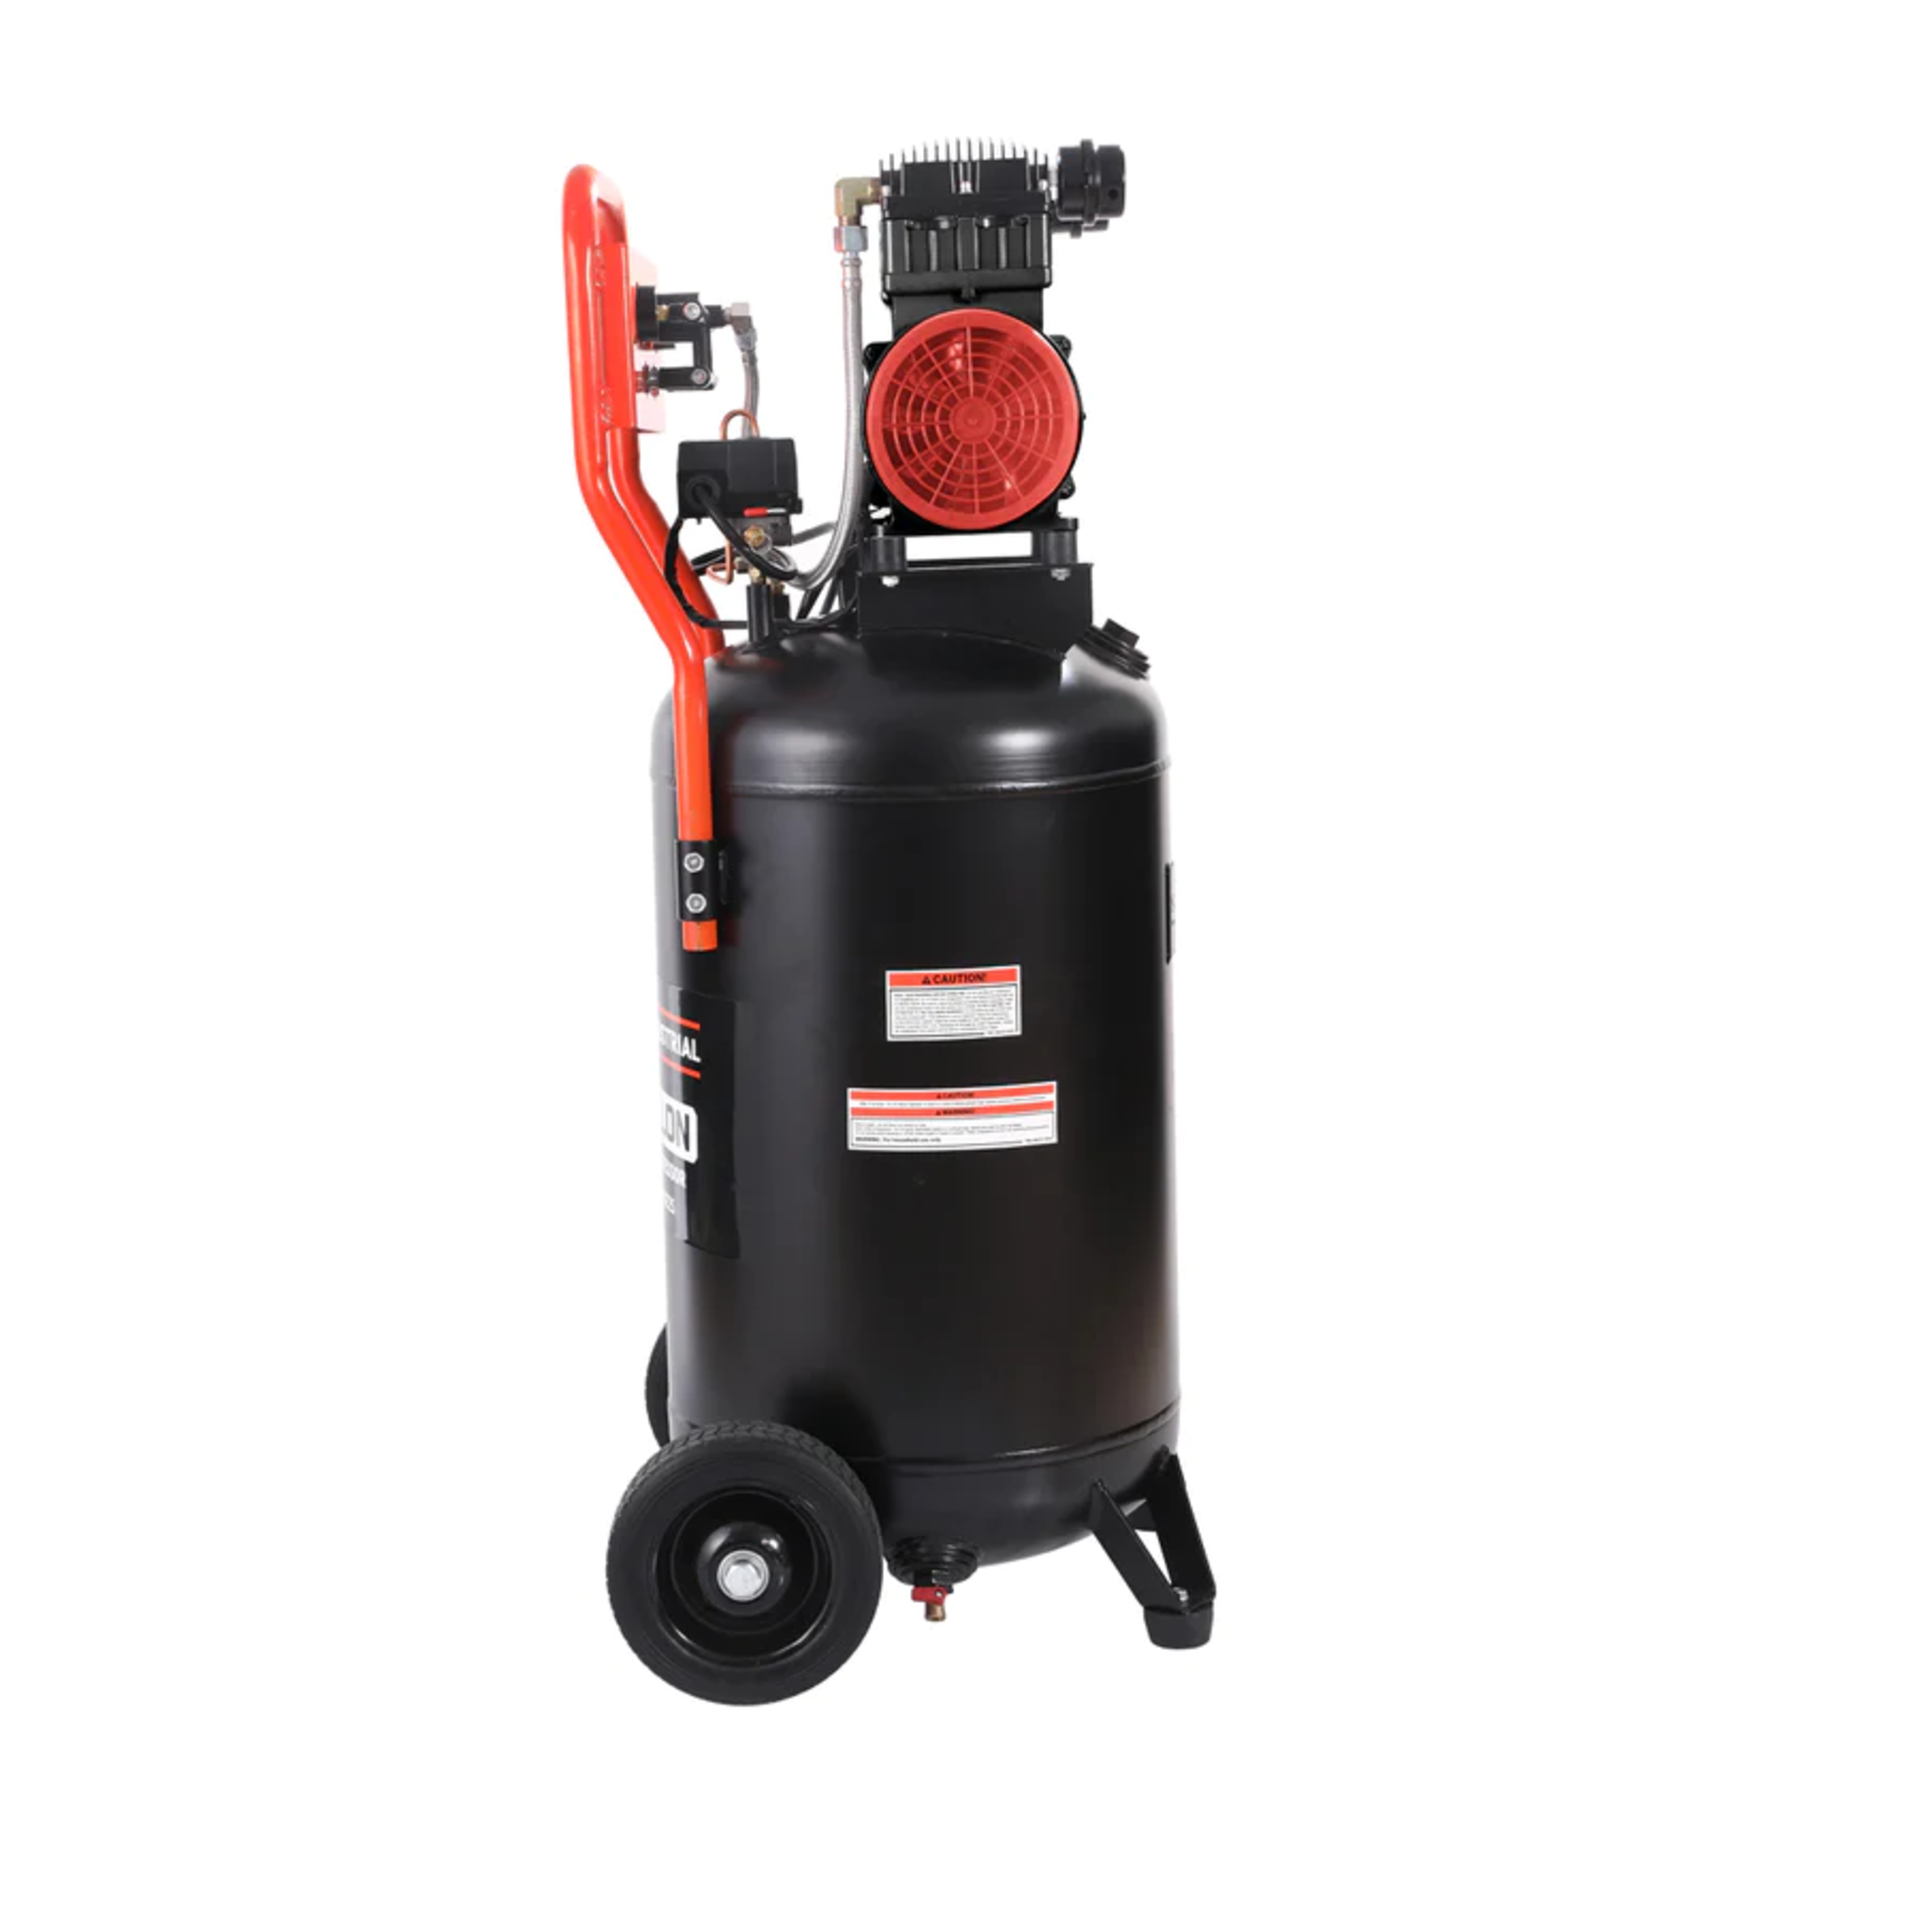 TMG-ACE25 PORTABLE ELECTRIC AIR COMPRESSOR-2HP 25G TMG-ACE25 PORTABLE ELECTRIC AIR COMPRESSOR-2HP - Image 3 of 9